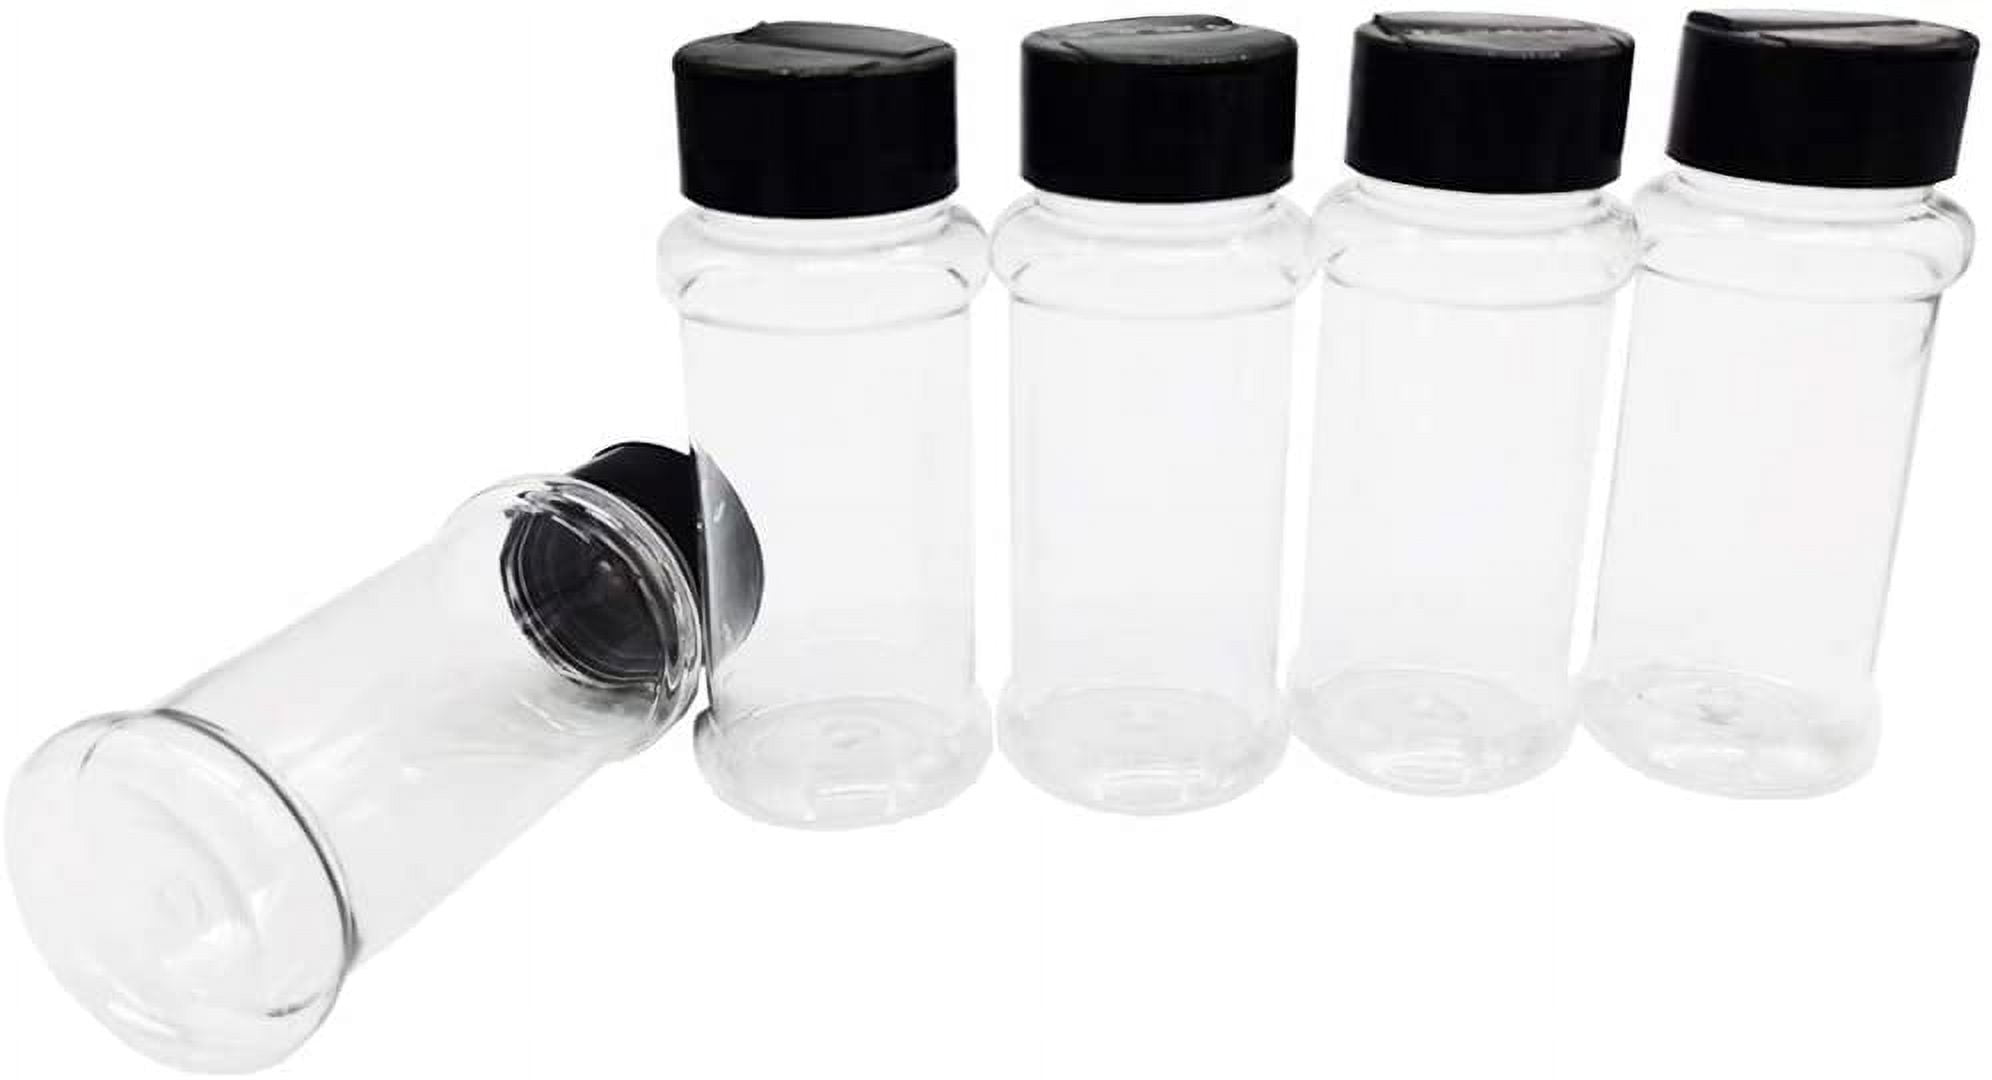 10pcs Empty Spice Bottles with Lid Reusable Plastic Containers for